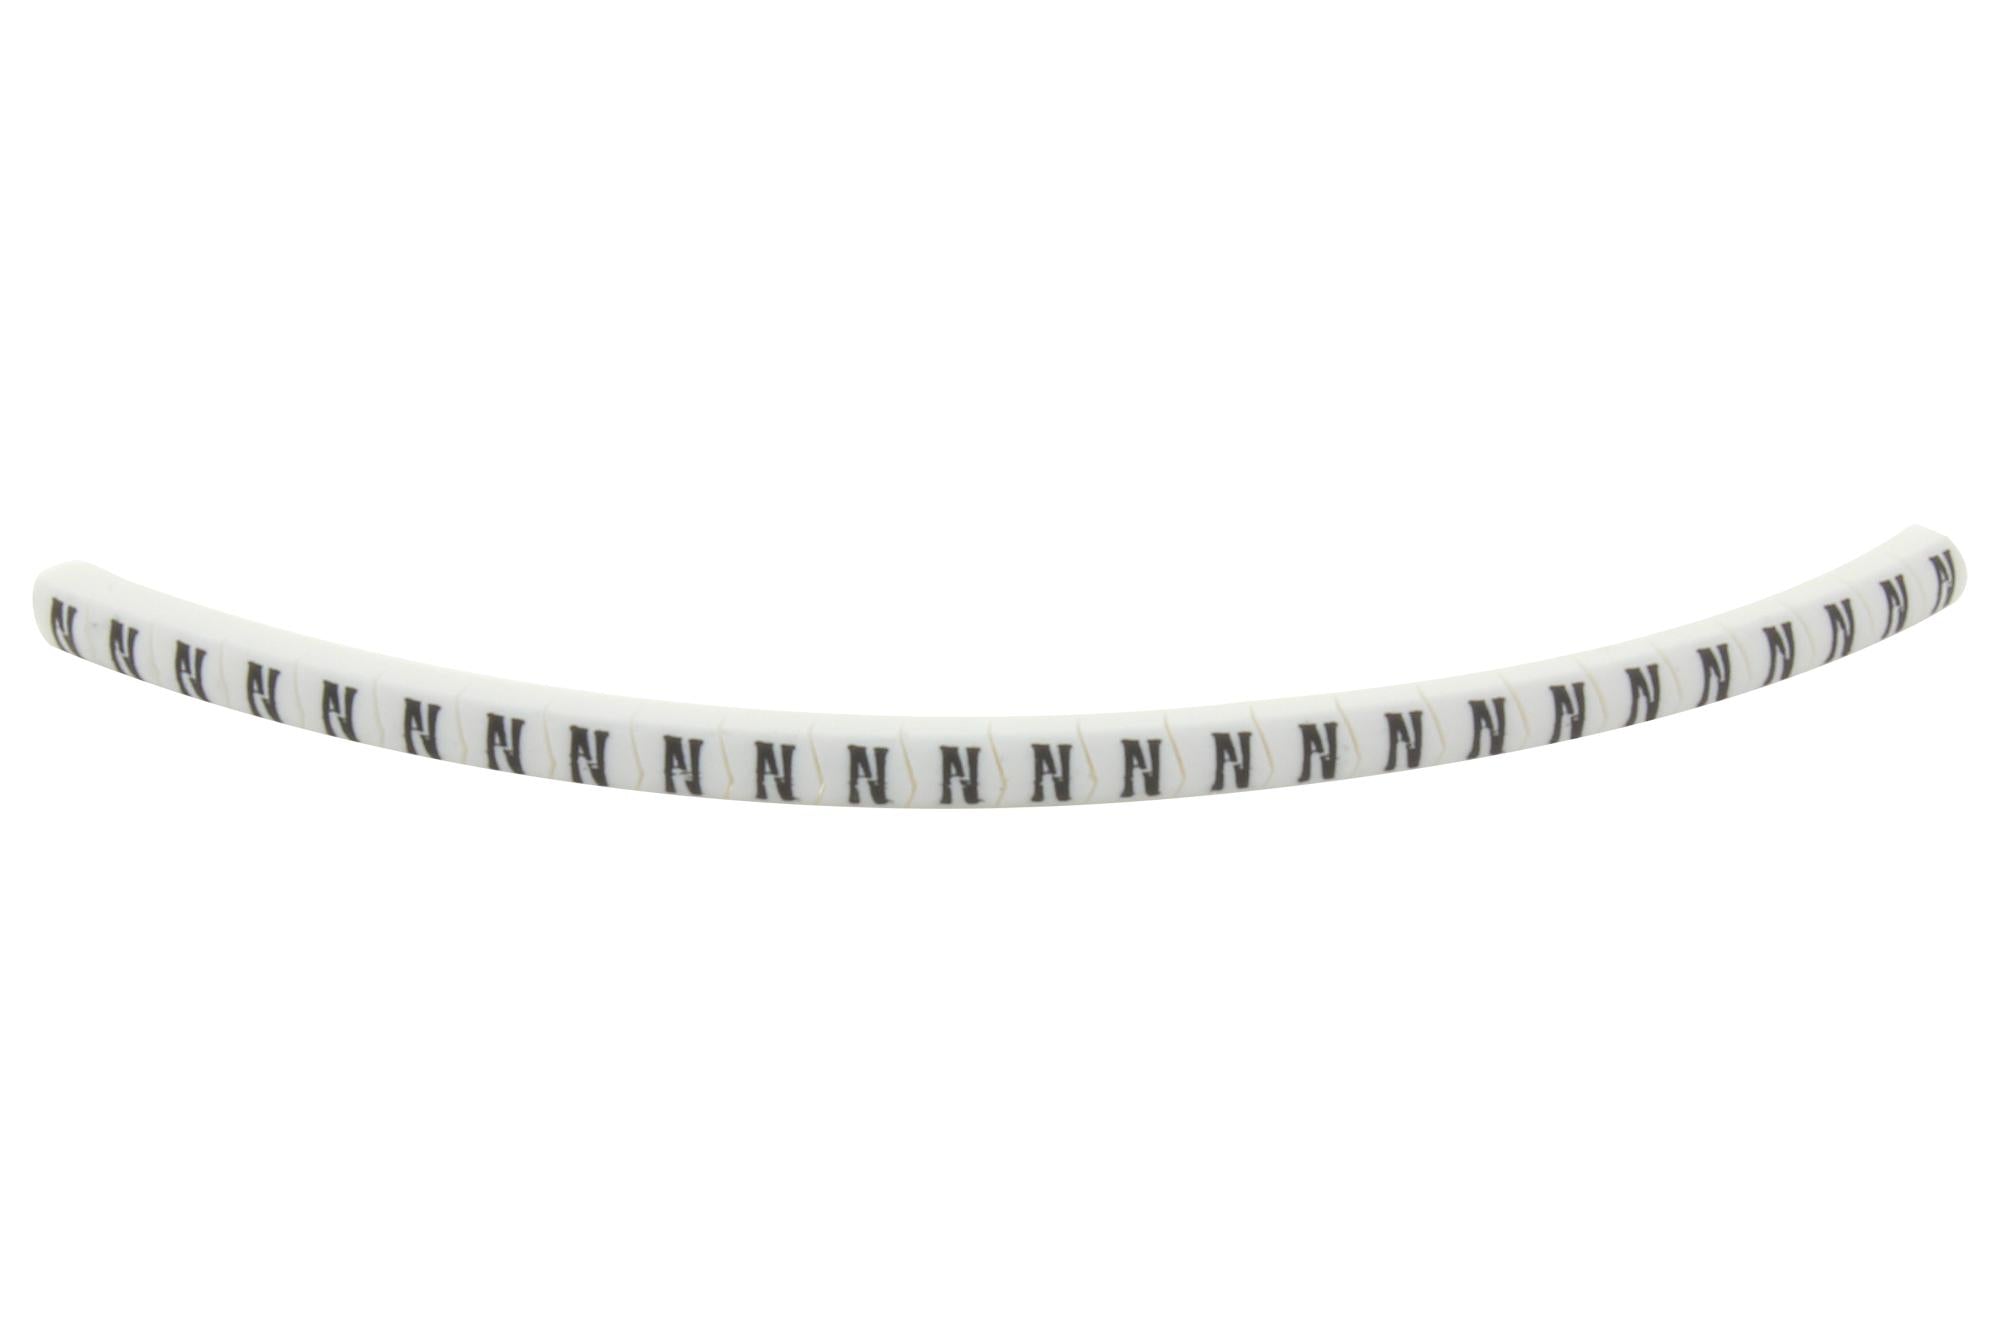 901-11037 CABLE MARKER, PRE PRINTED, PVC, WHITE HELLERMANNTYTON